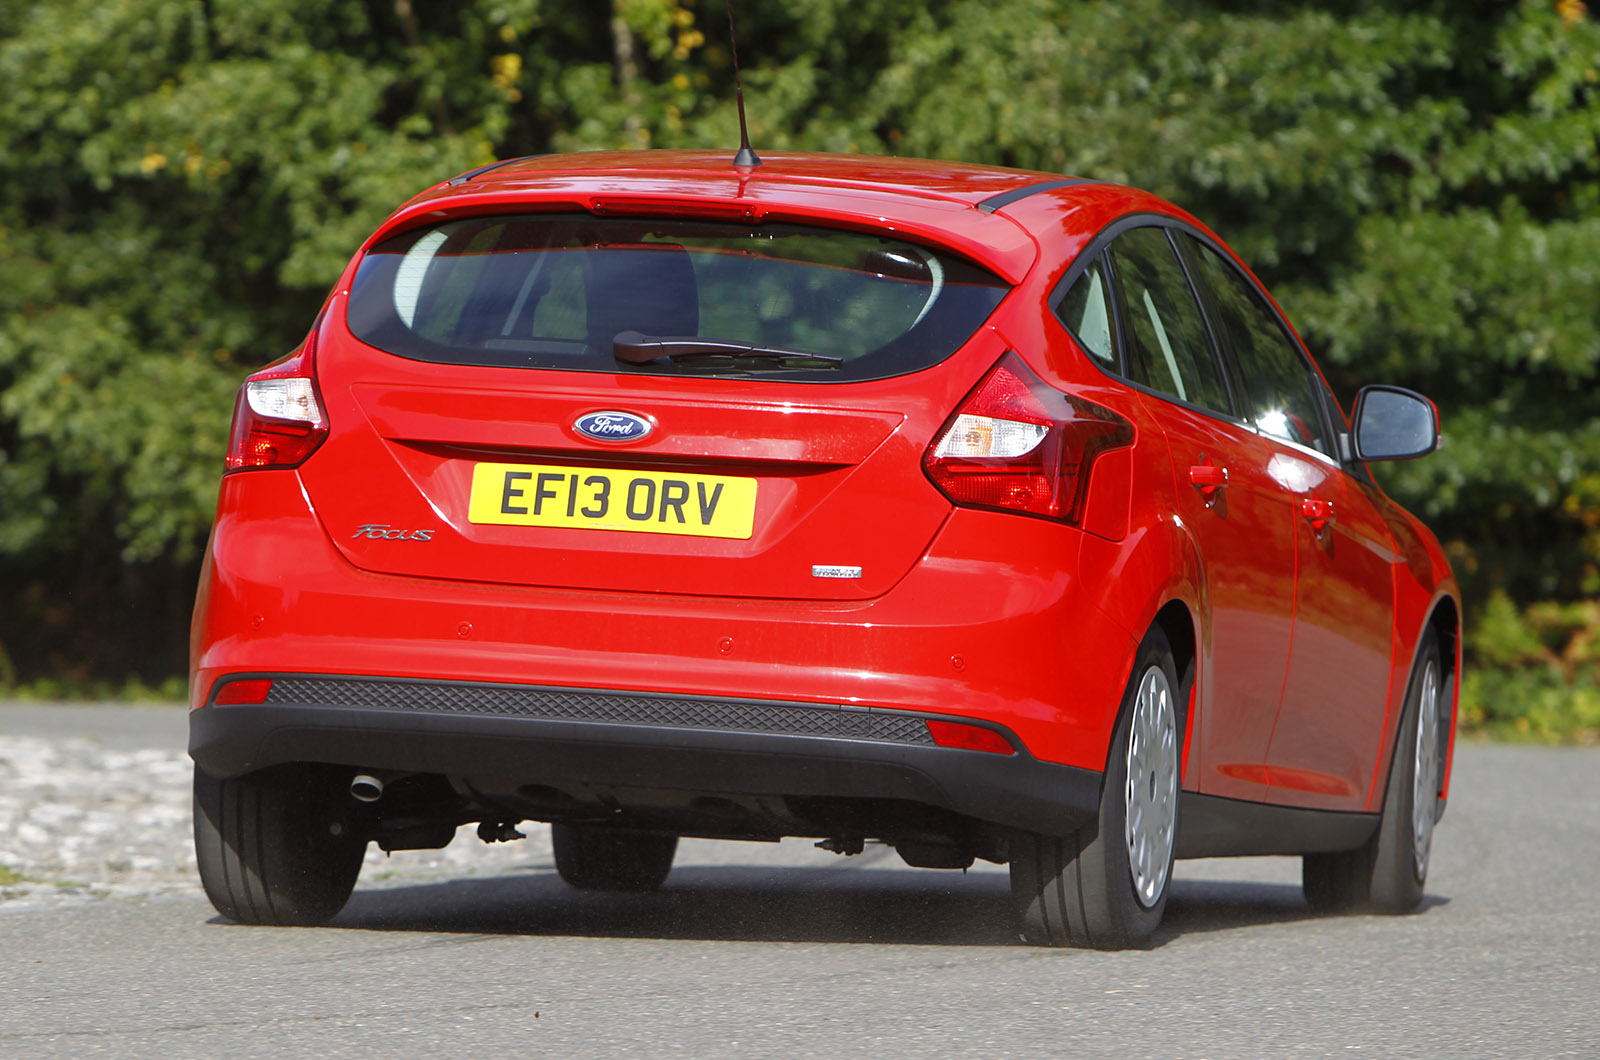 Ford focus 1.6 tdci econetic review #4